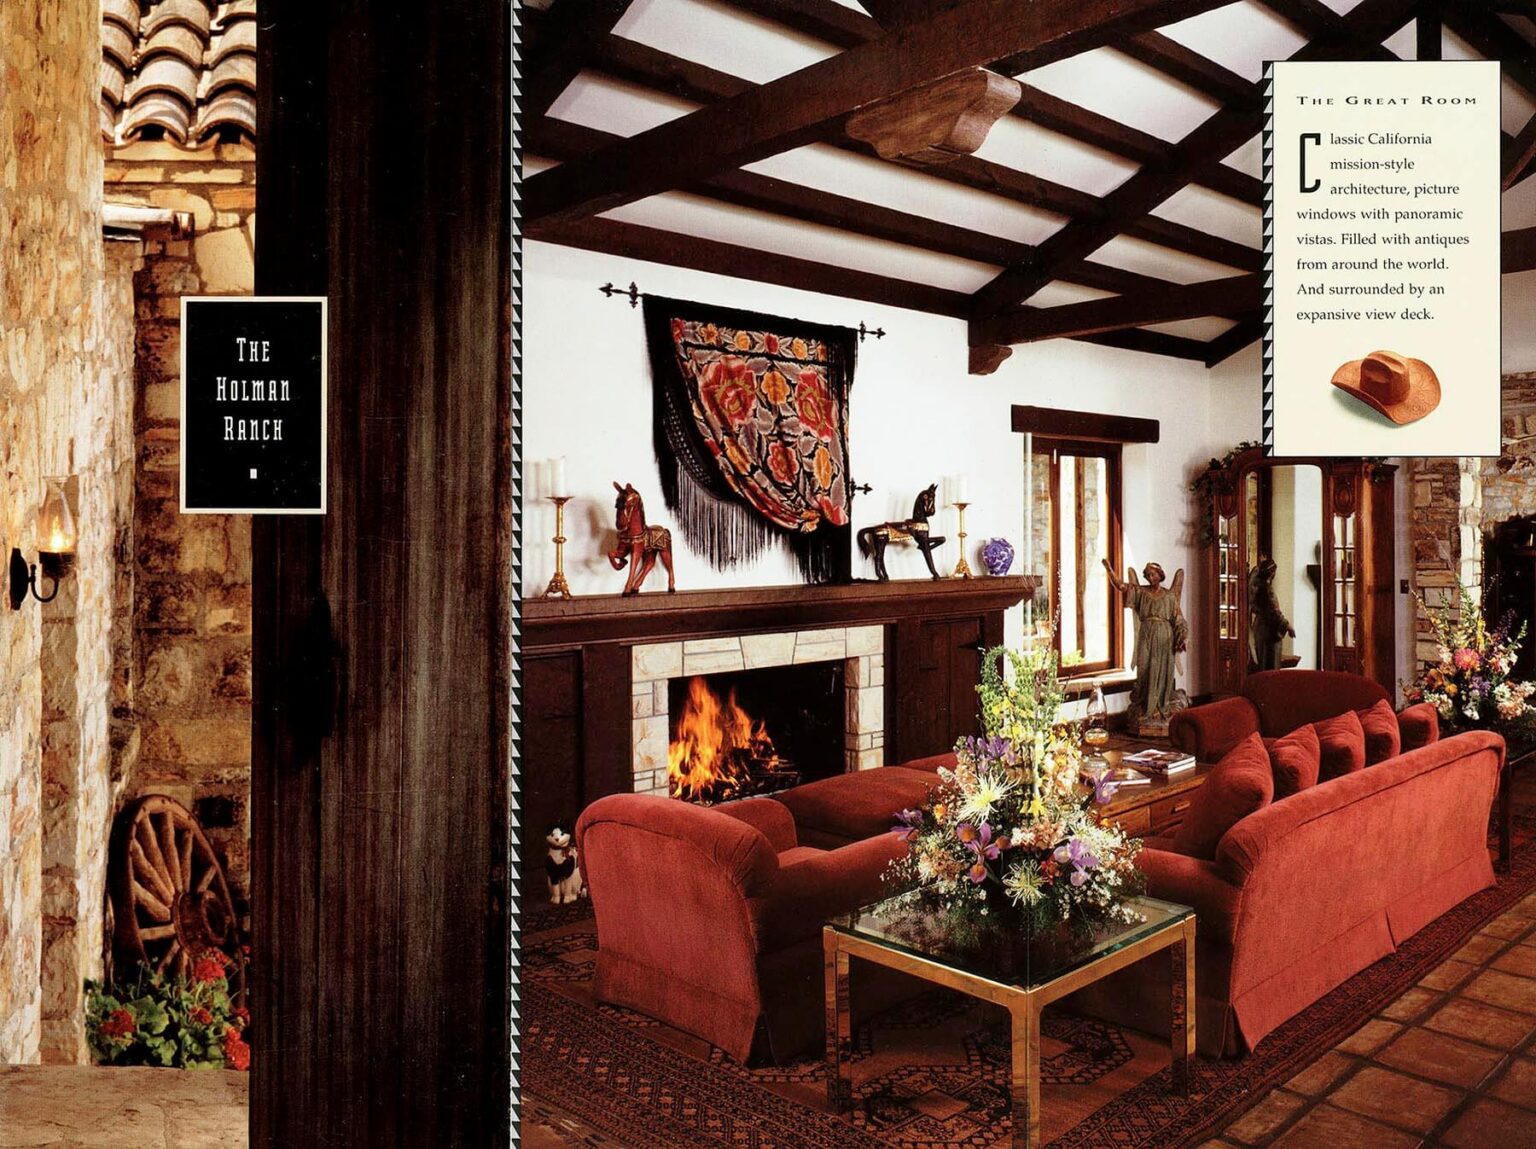 Brochure for the Holman Ranch in Carmel Valley. - Architecture photography by Eagle Visions Photography